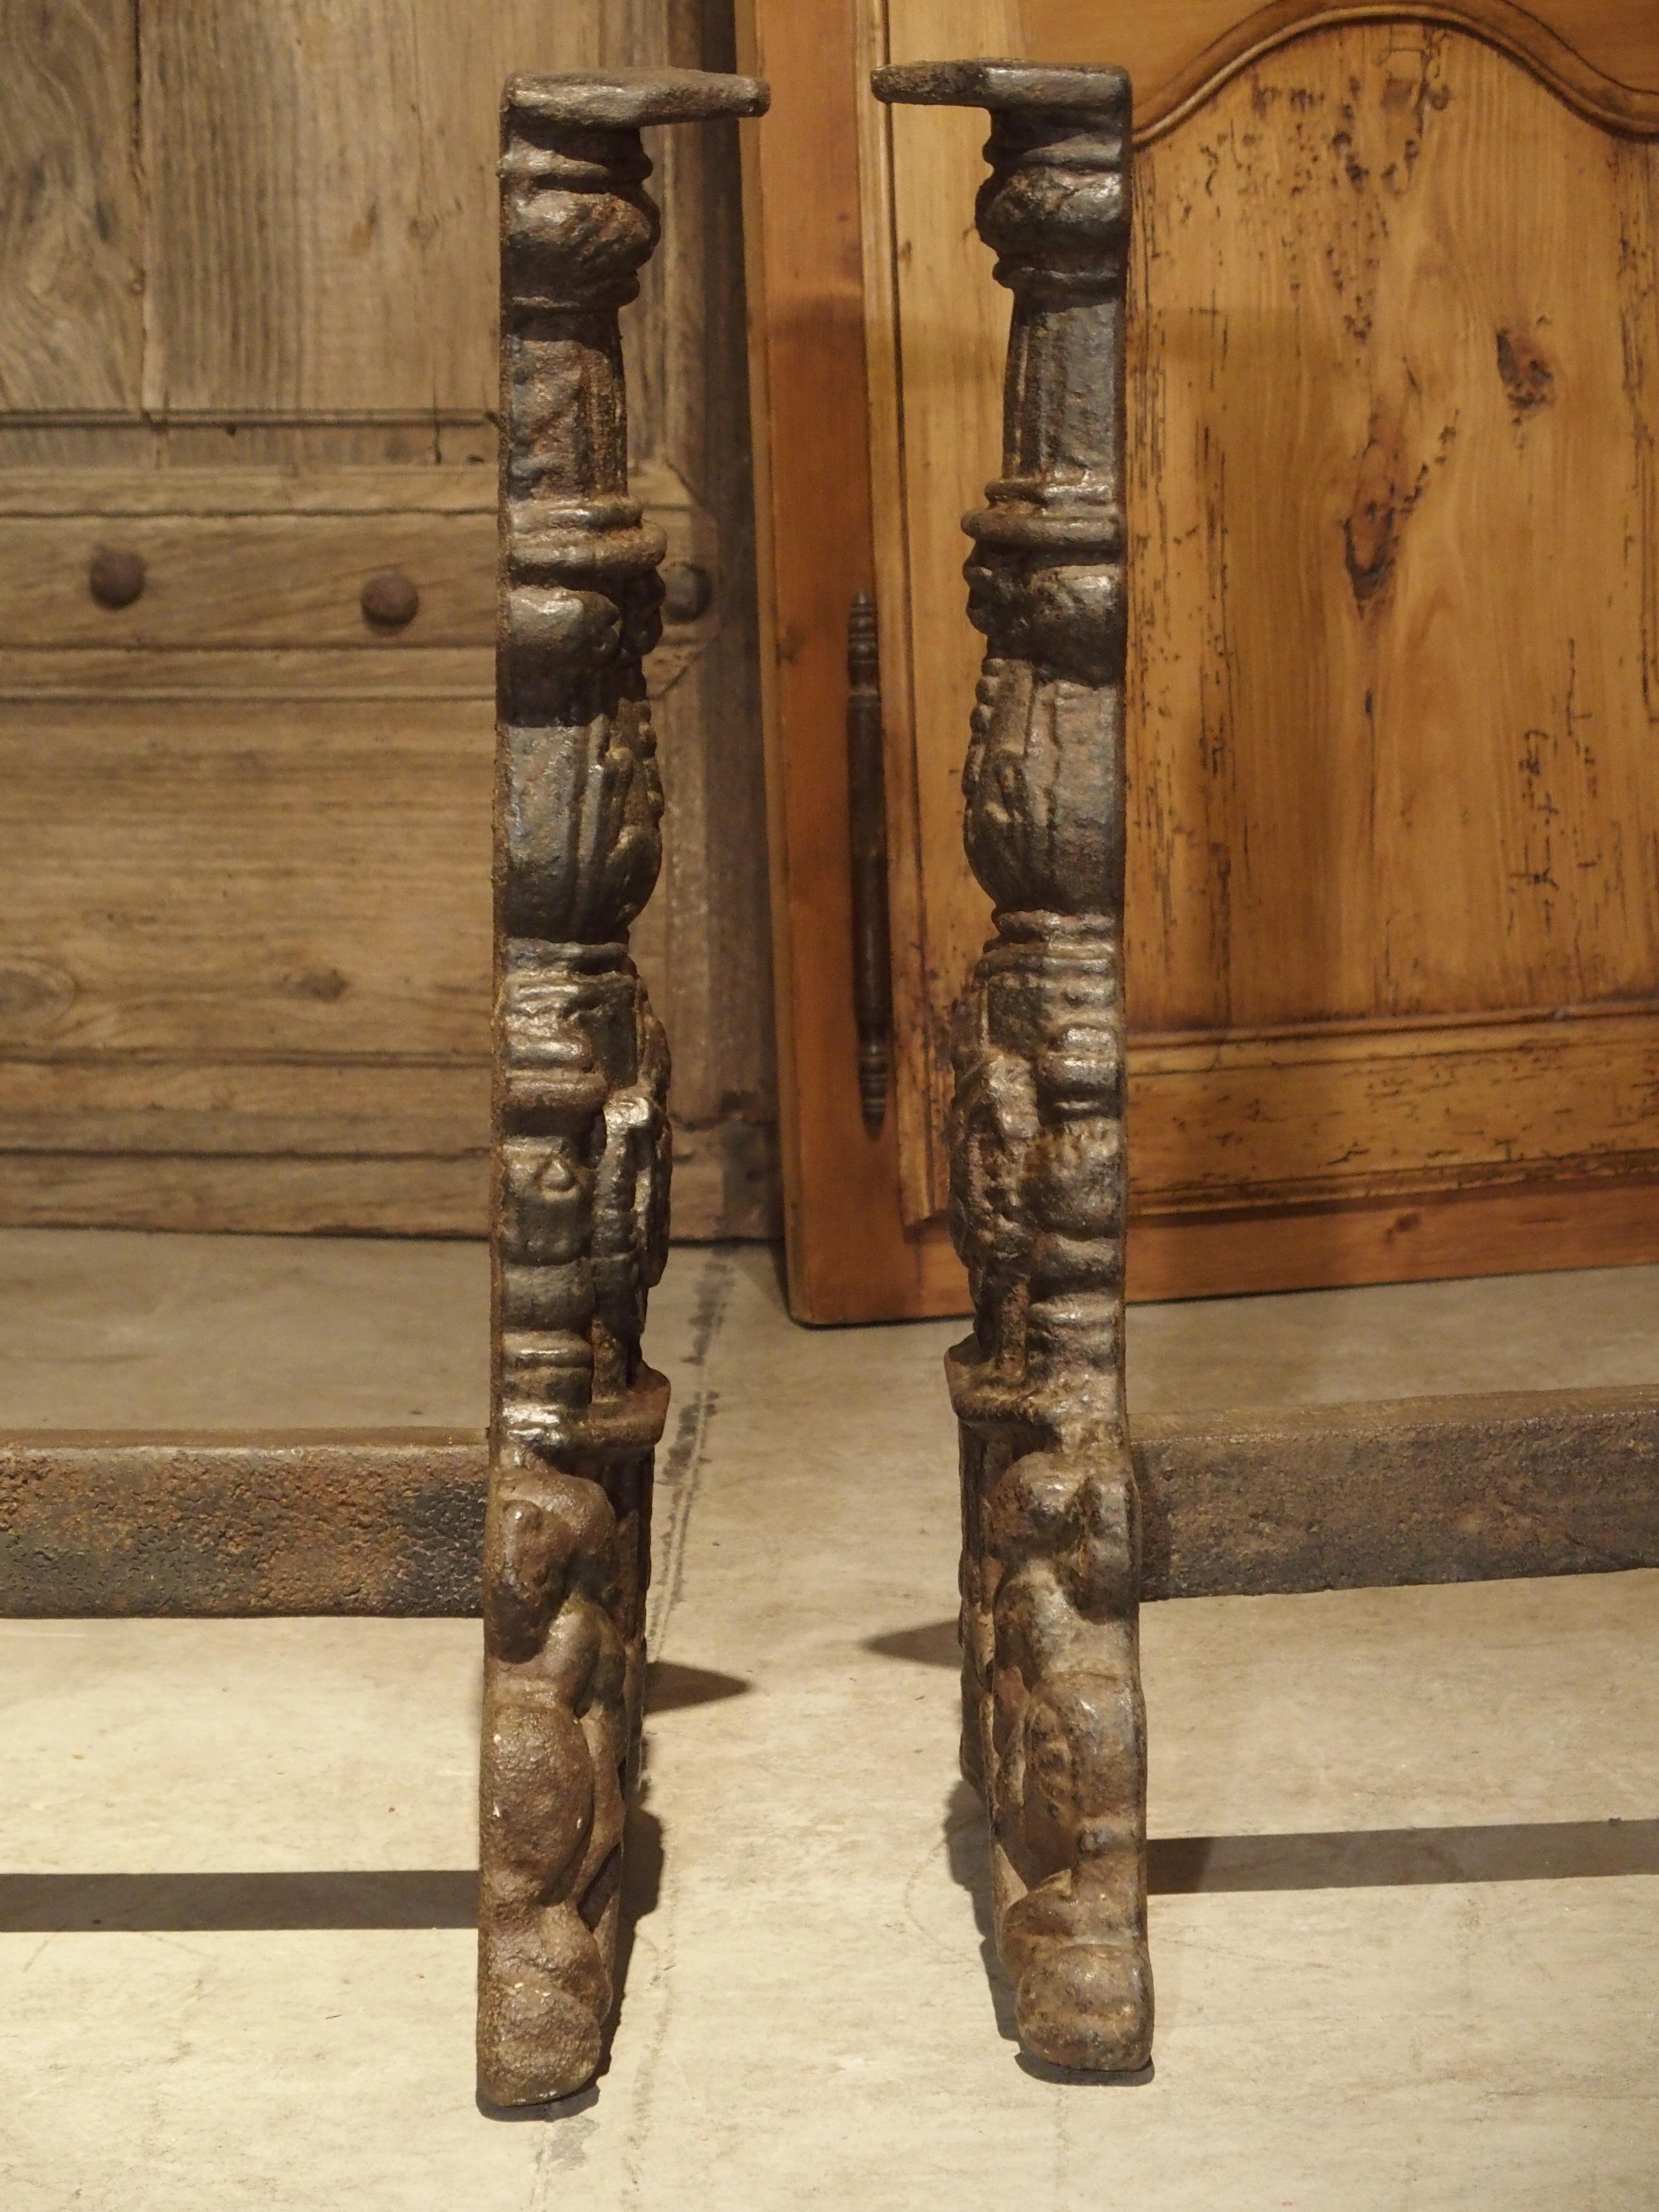 These magnificent andirons are period French Renaissance, and they date to the 1500s. There are fluted columns with balusters and a shield with a crown beneath. Pairs of winged angels rest upon the curved feet and appear to be holding up the entire